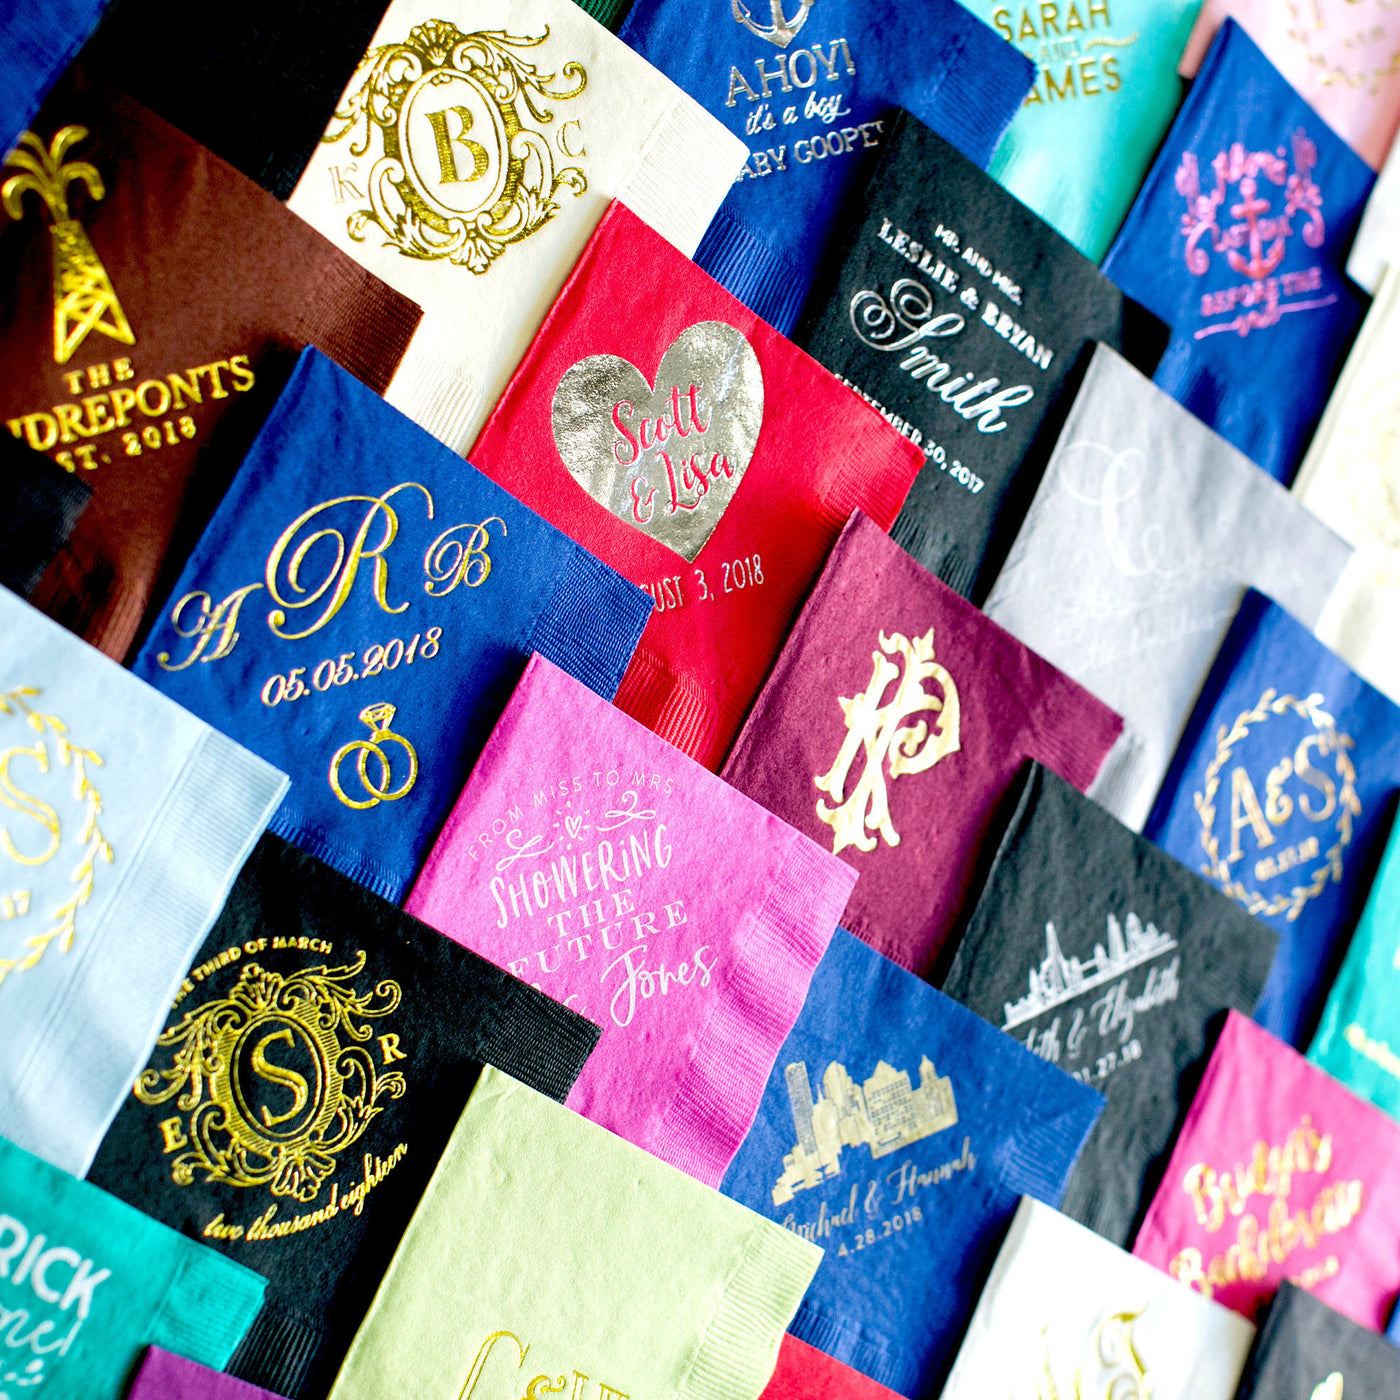 Personalized Monogram Guest Towels